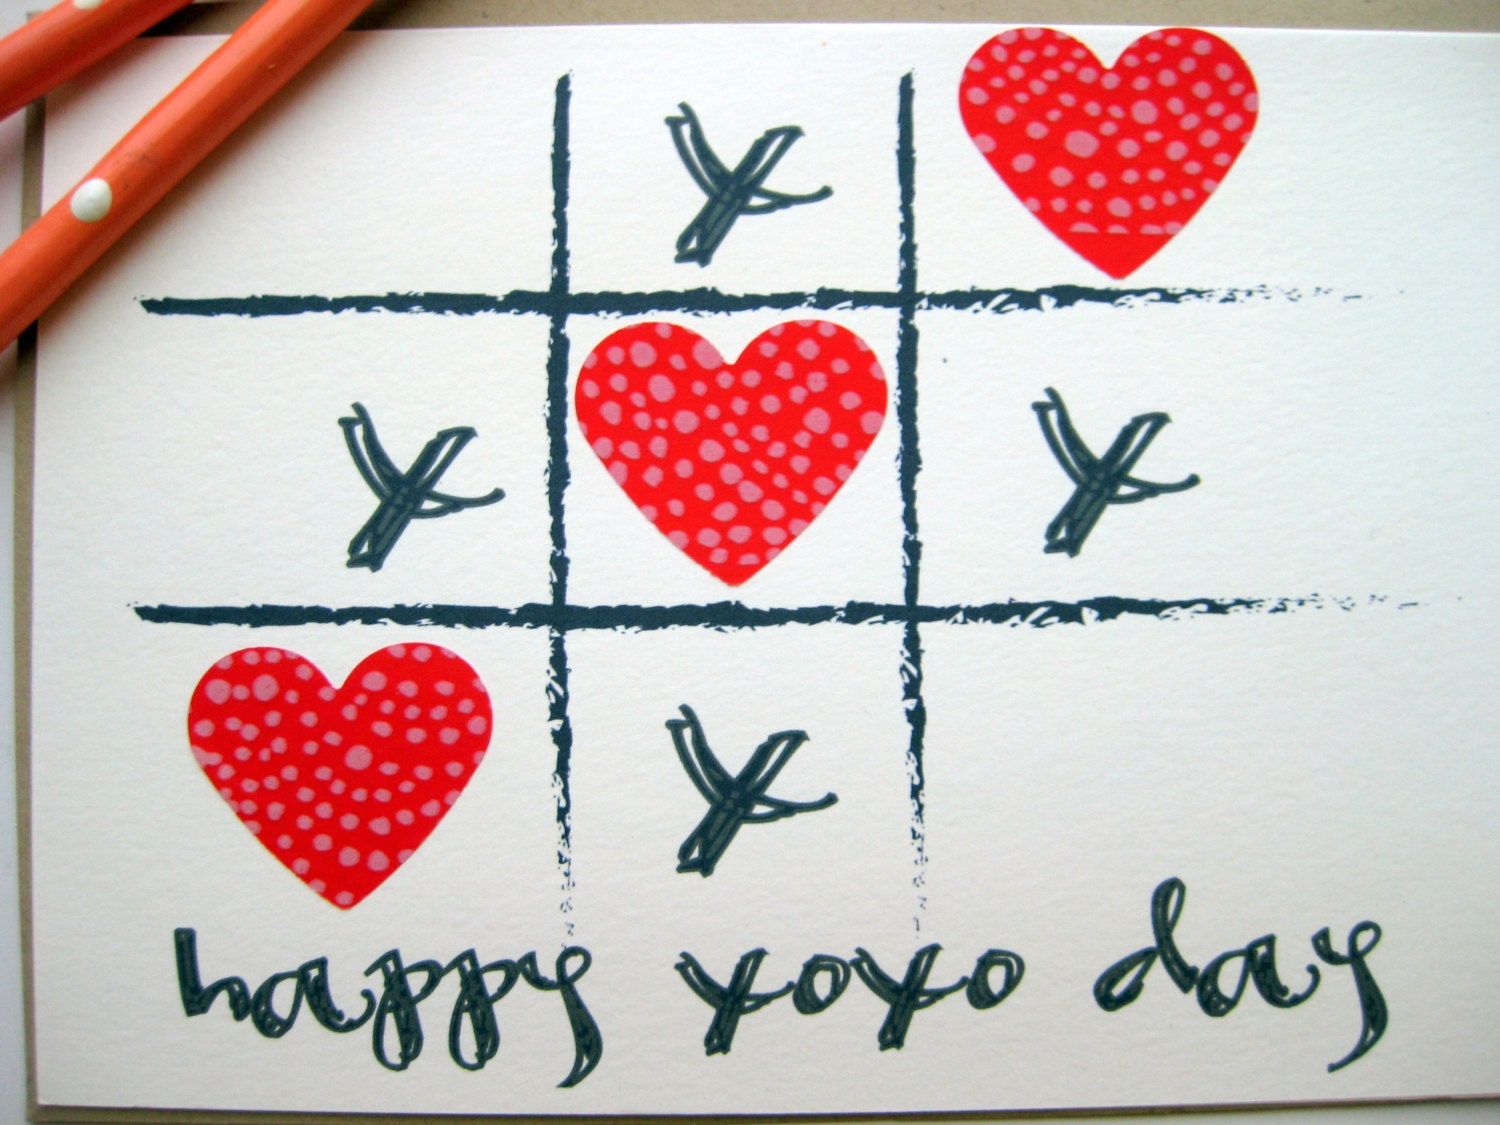 Hugs and Kisses xoxo Tic Tac Toe with Red Hearts - Valentine's Day Card - 5farthings